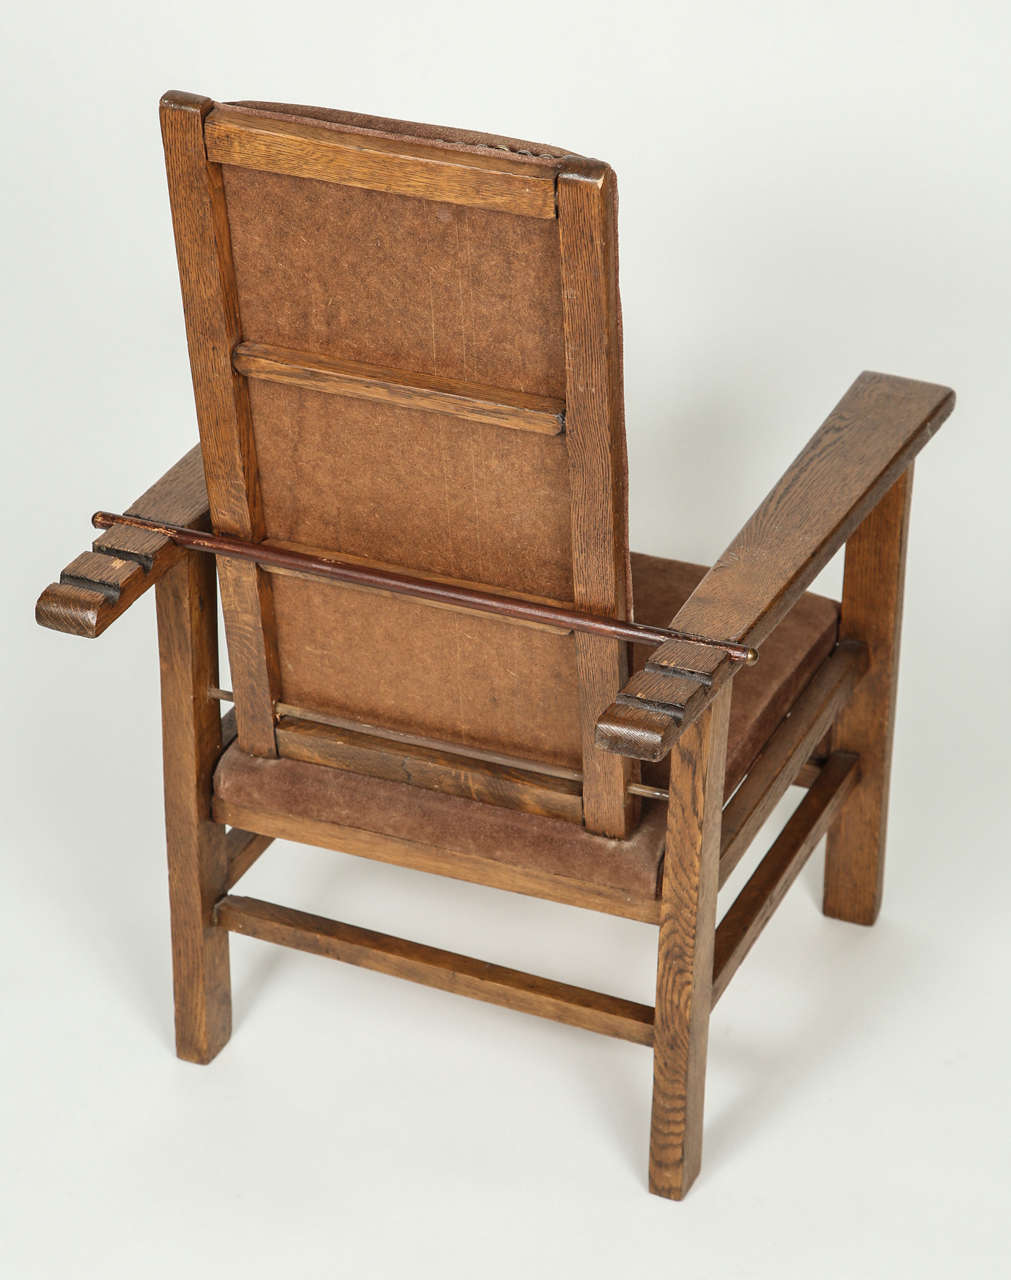 Antique Oak Child's Morris Chair For Sale at 1stdibs